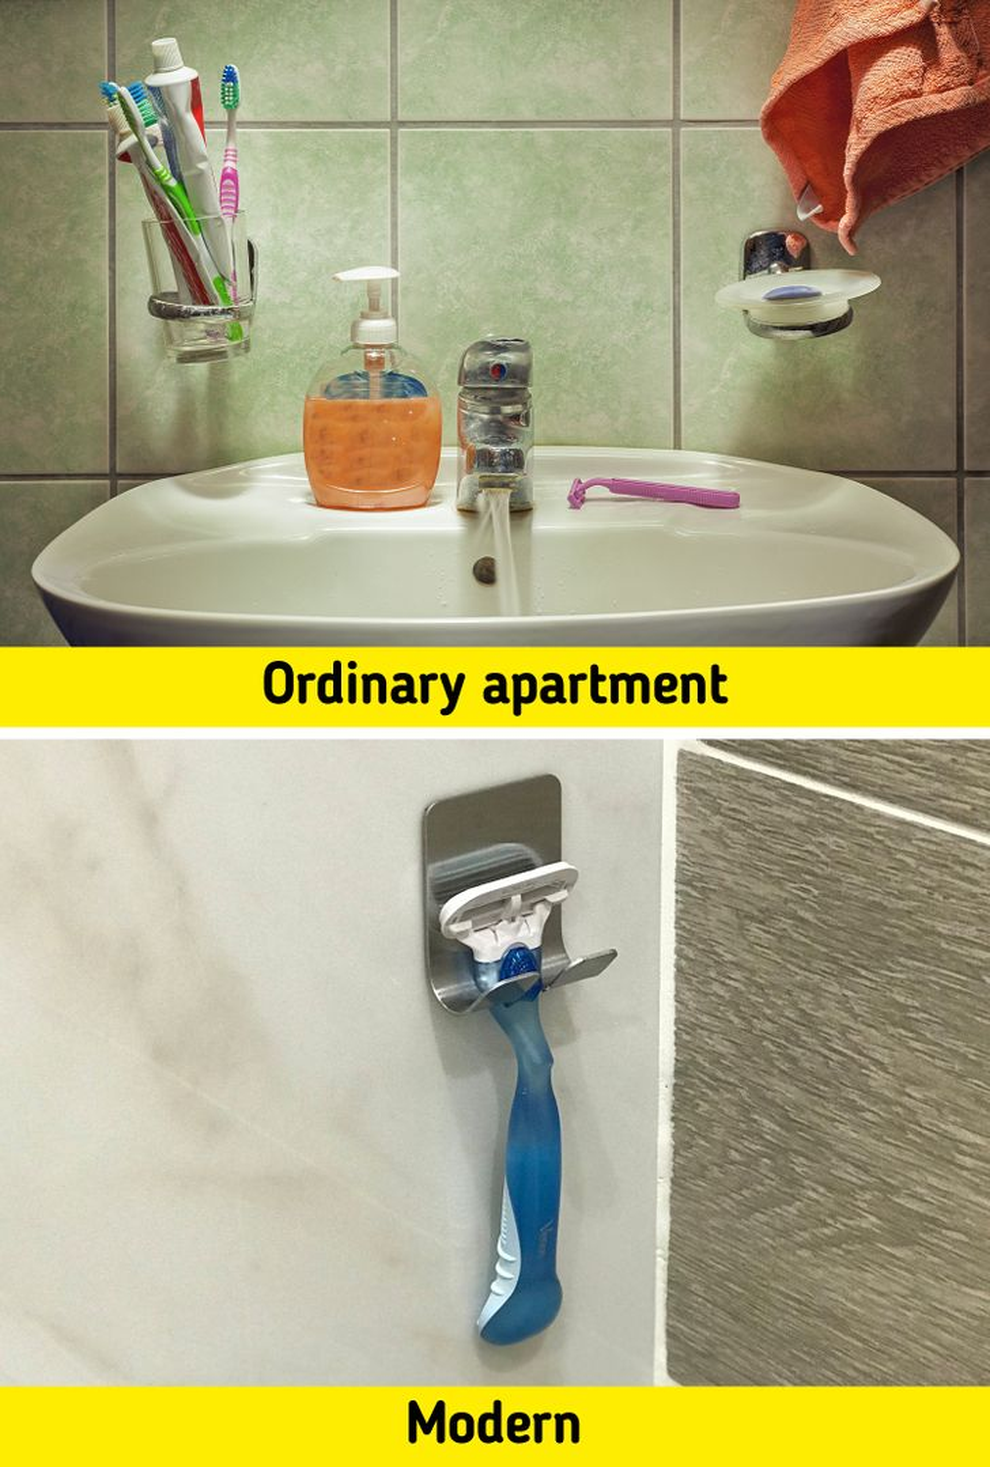 Turn an ordinary apartment into a modern one with just 10 simple items - 2